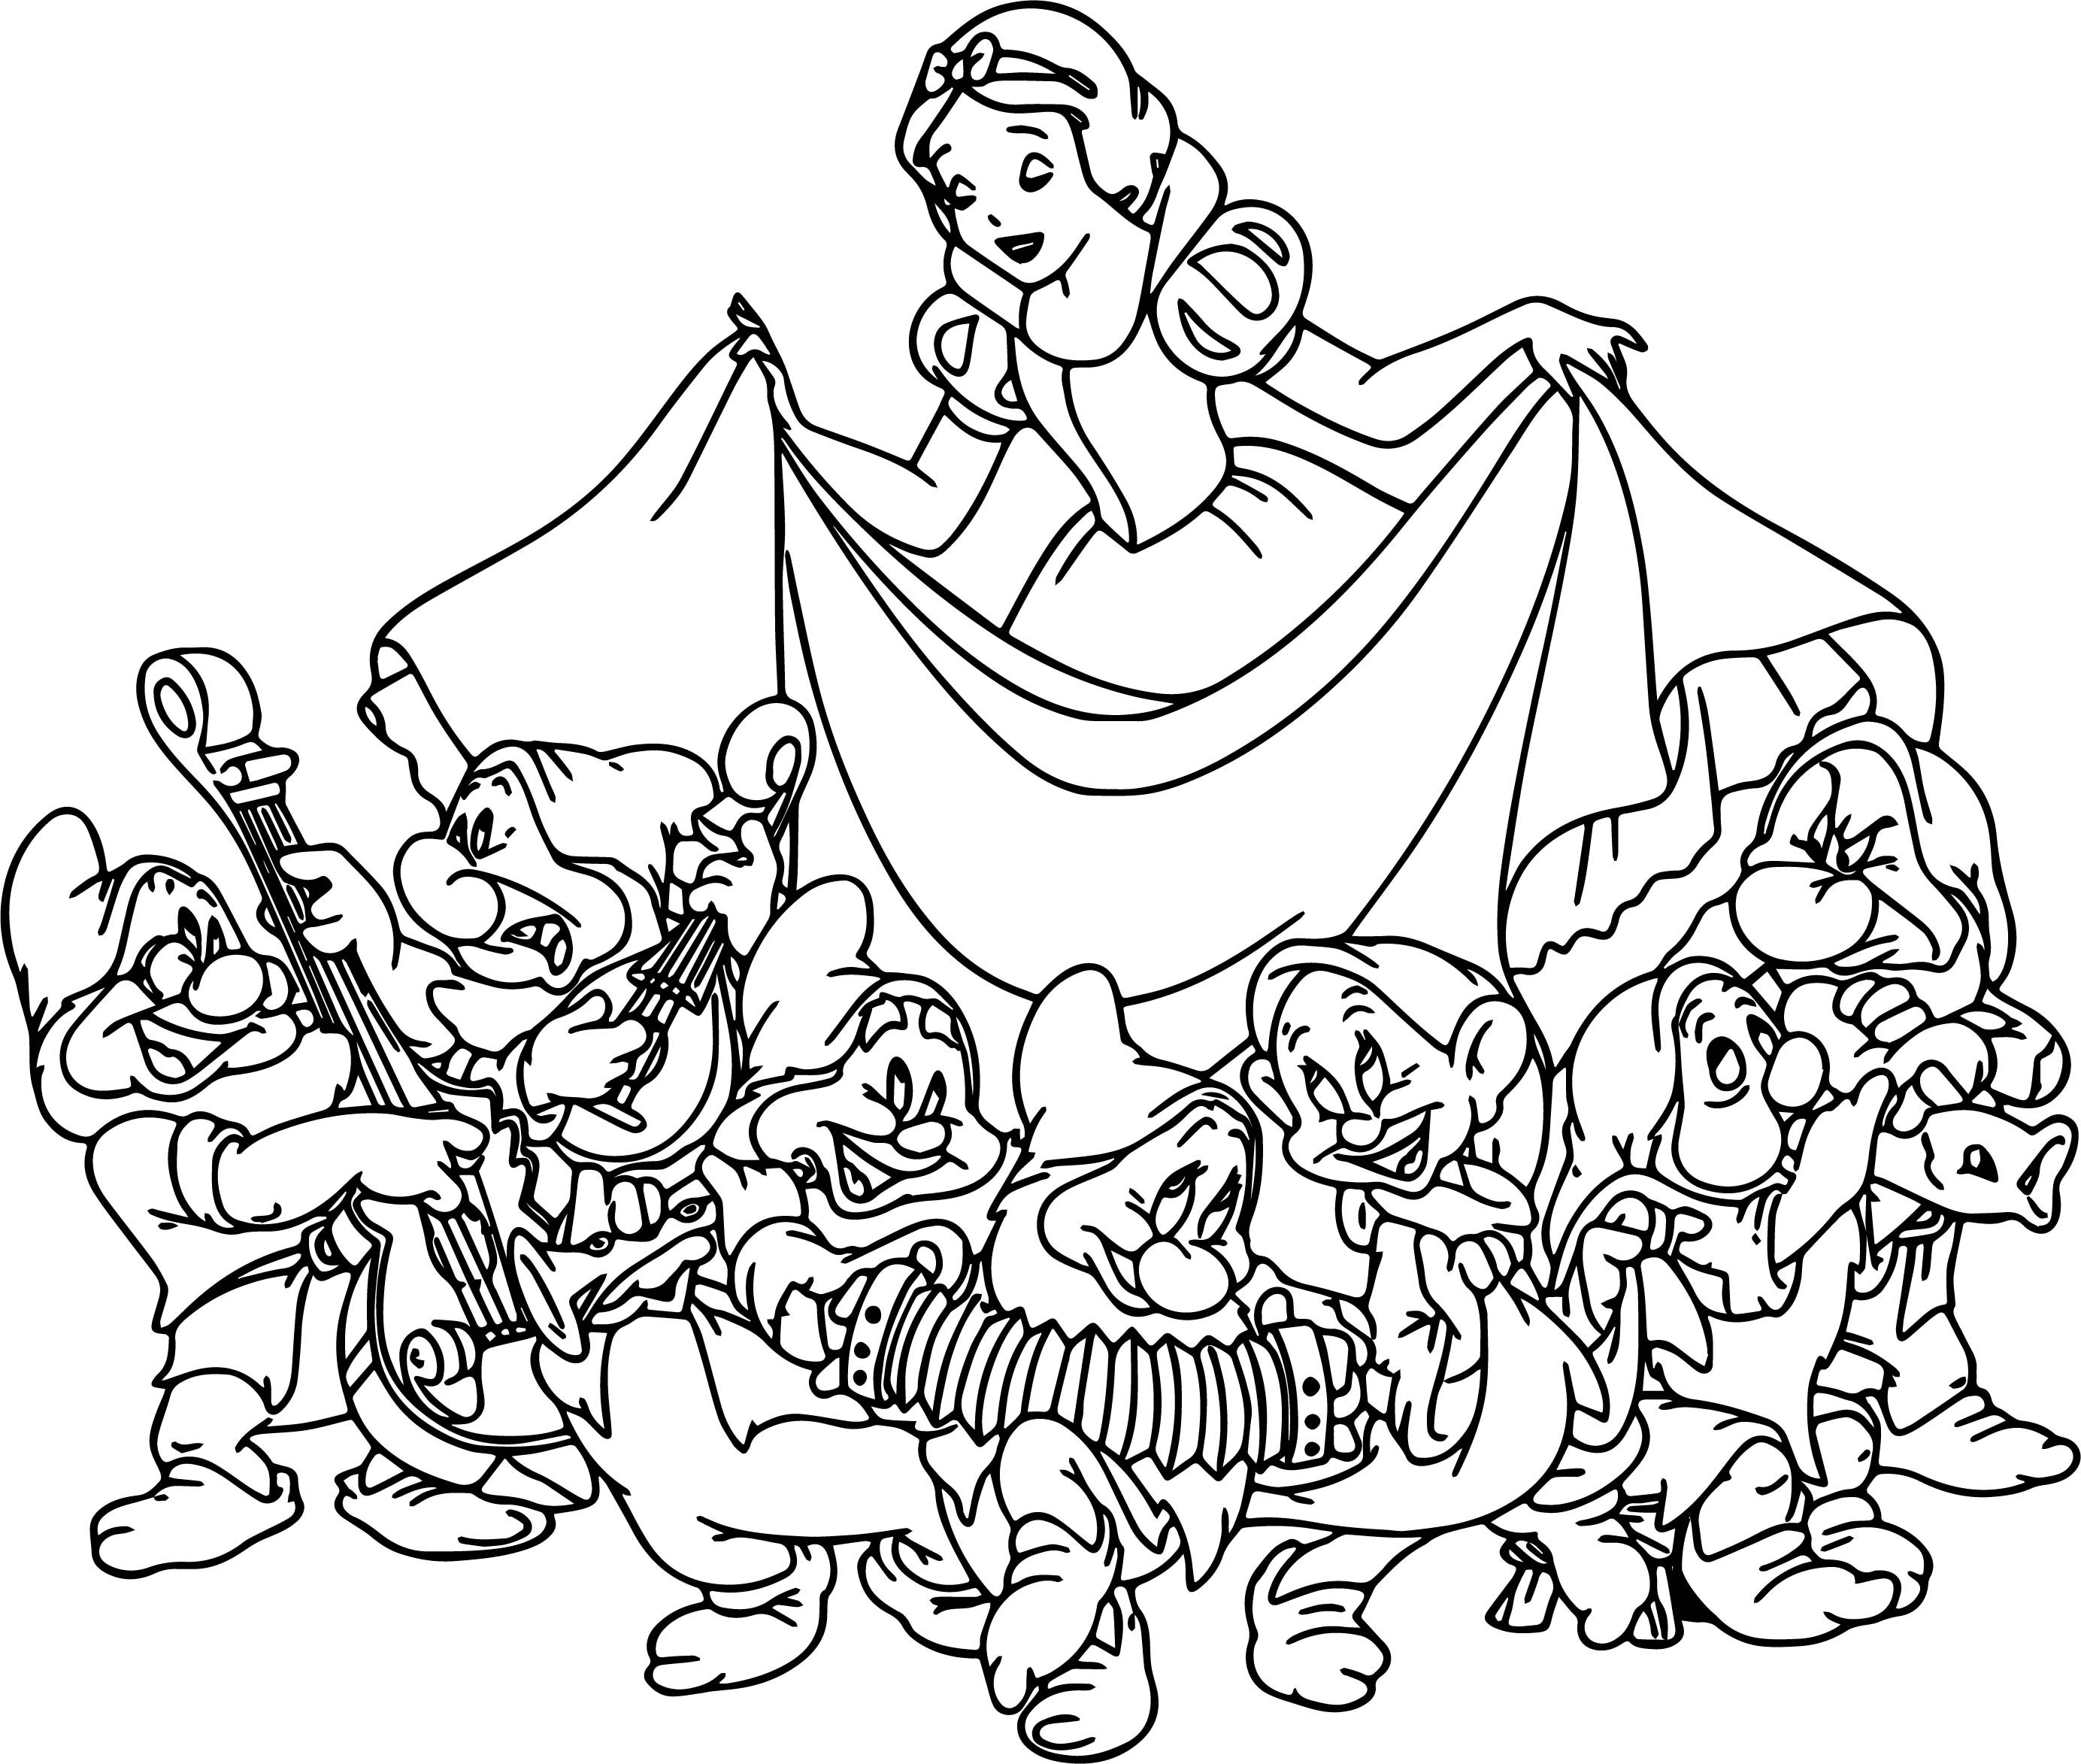 Snow White Cartoon Drawing at GetDrawings Free download